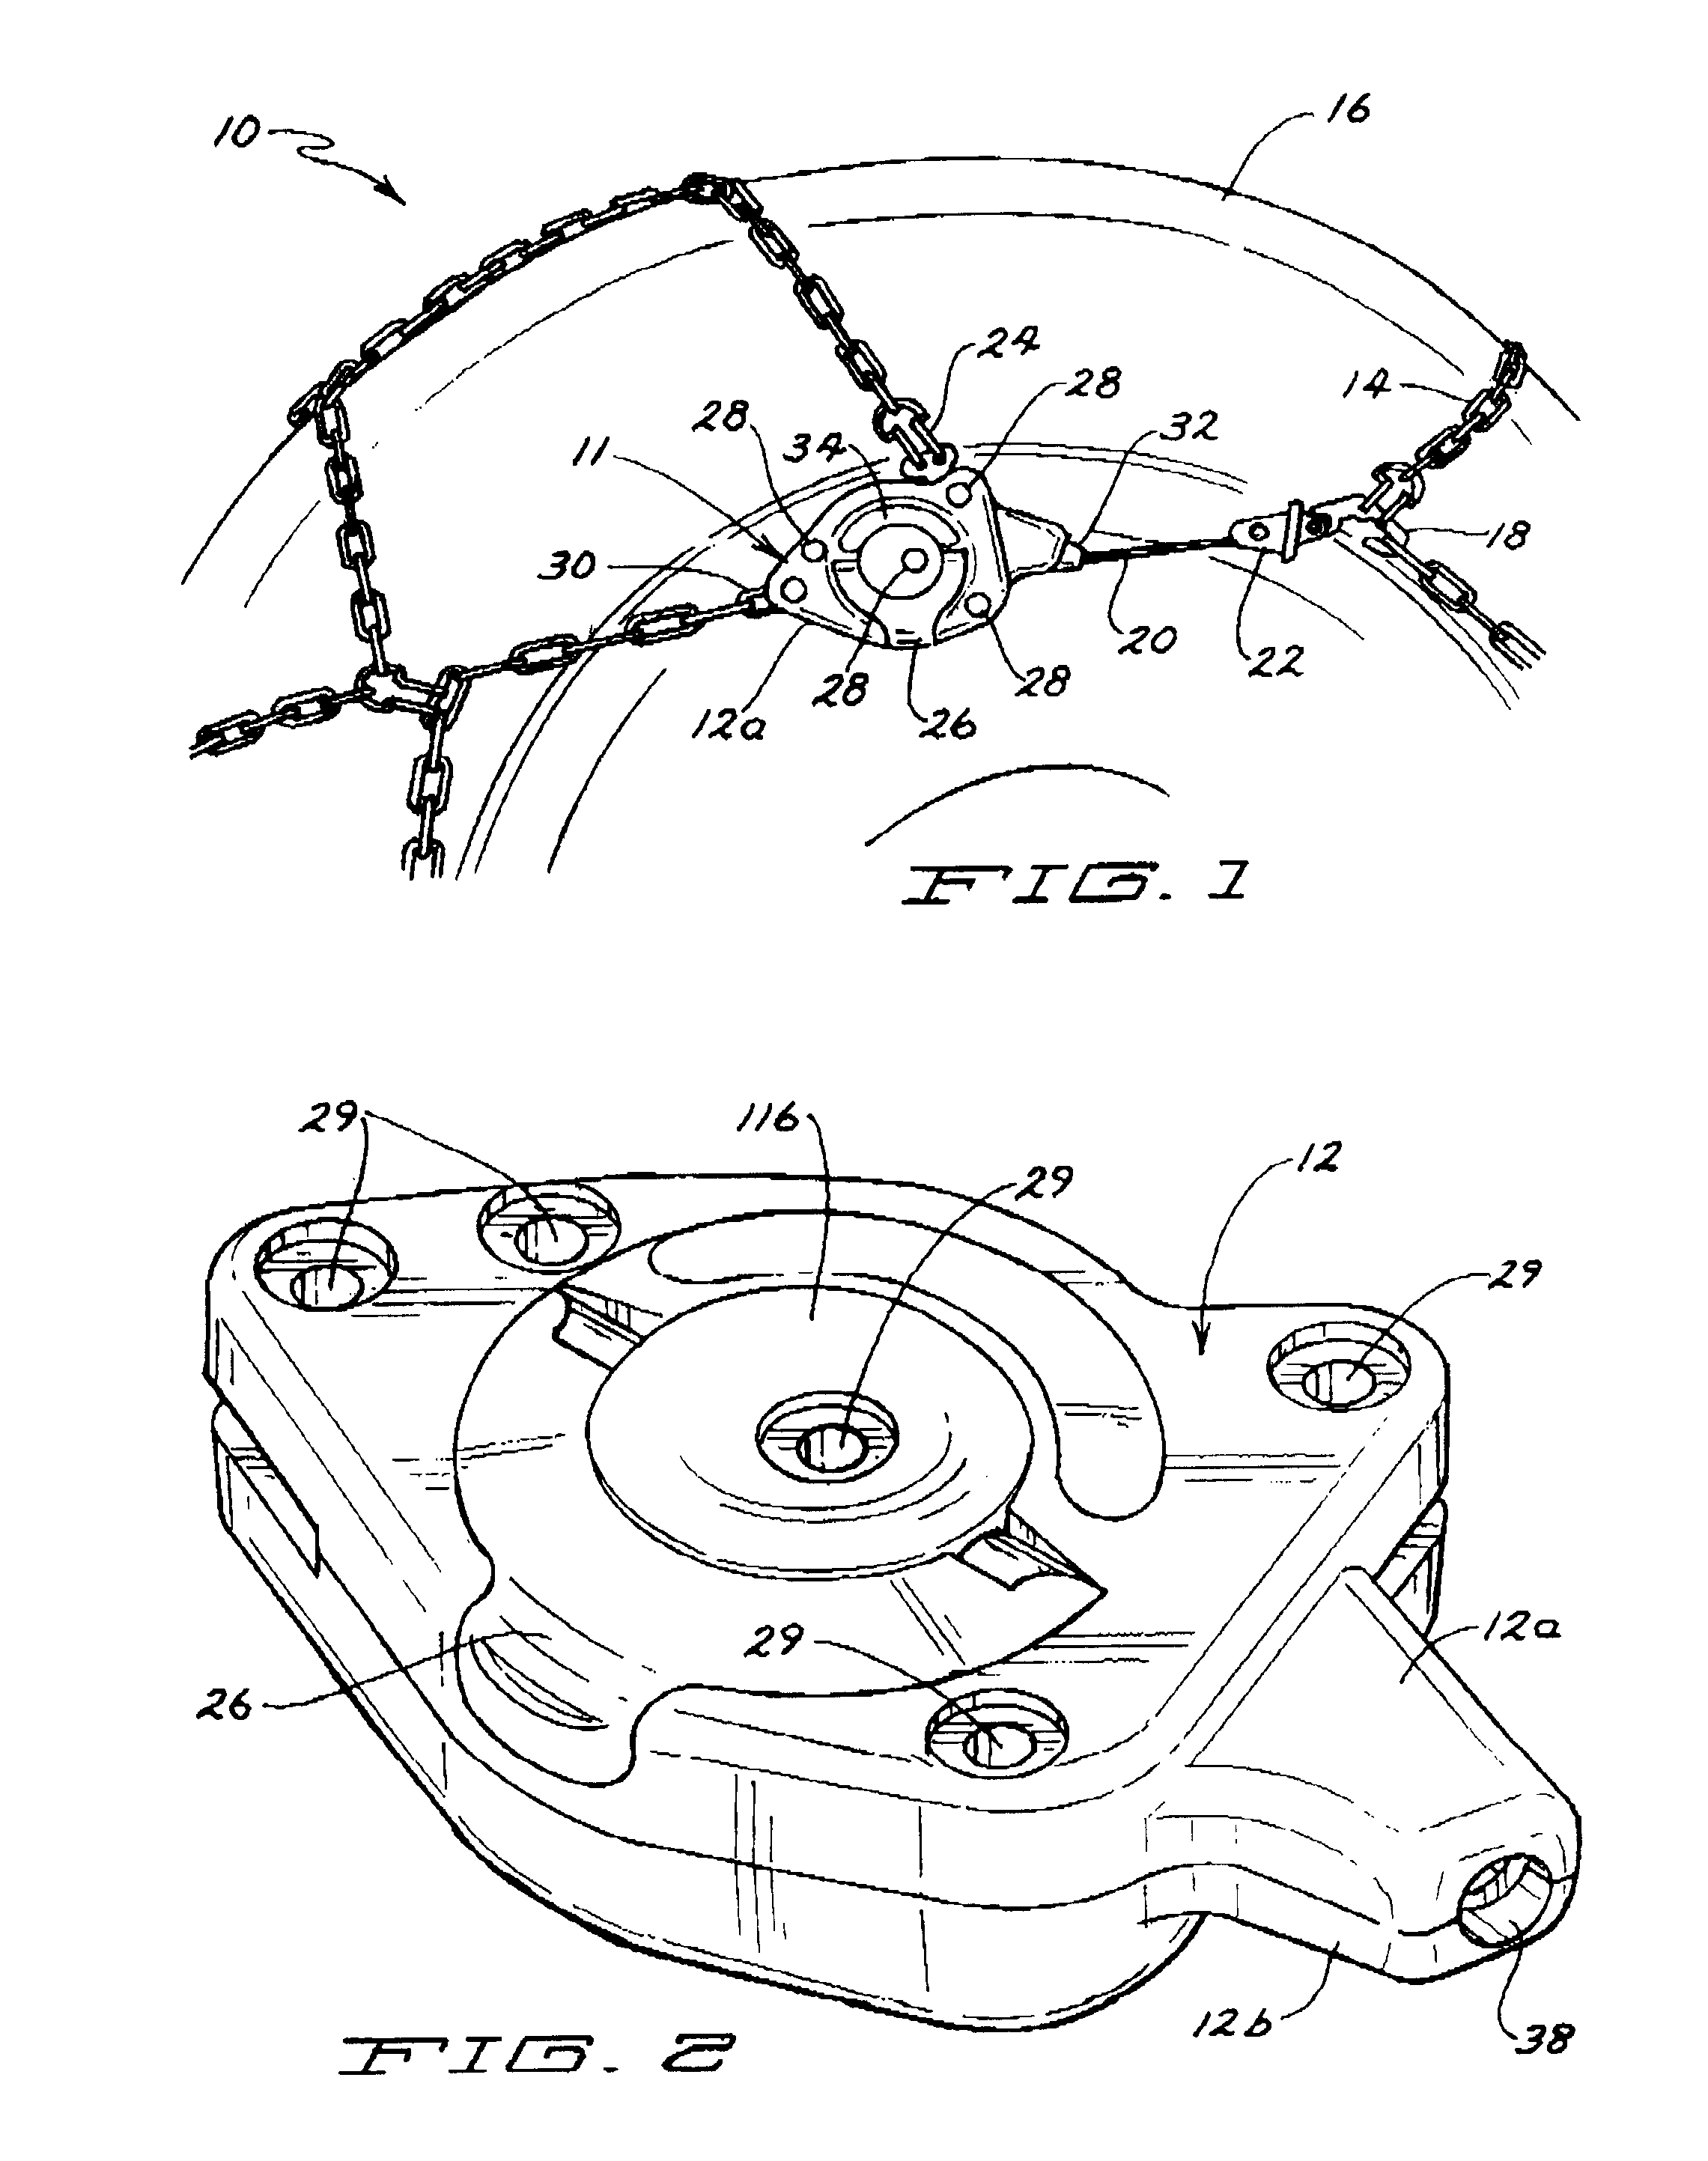 Self-tightening snow chain and methods of use